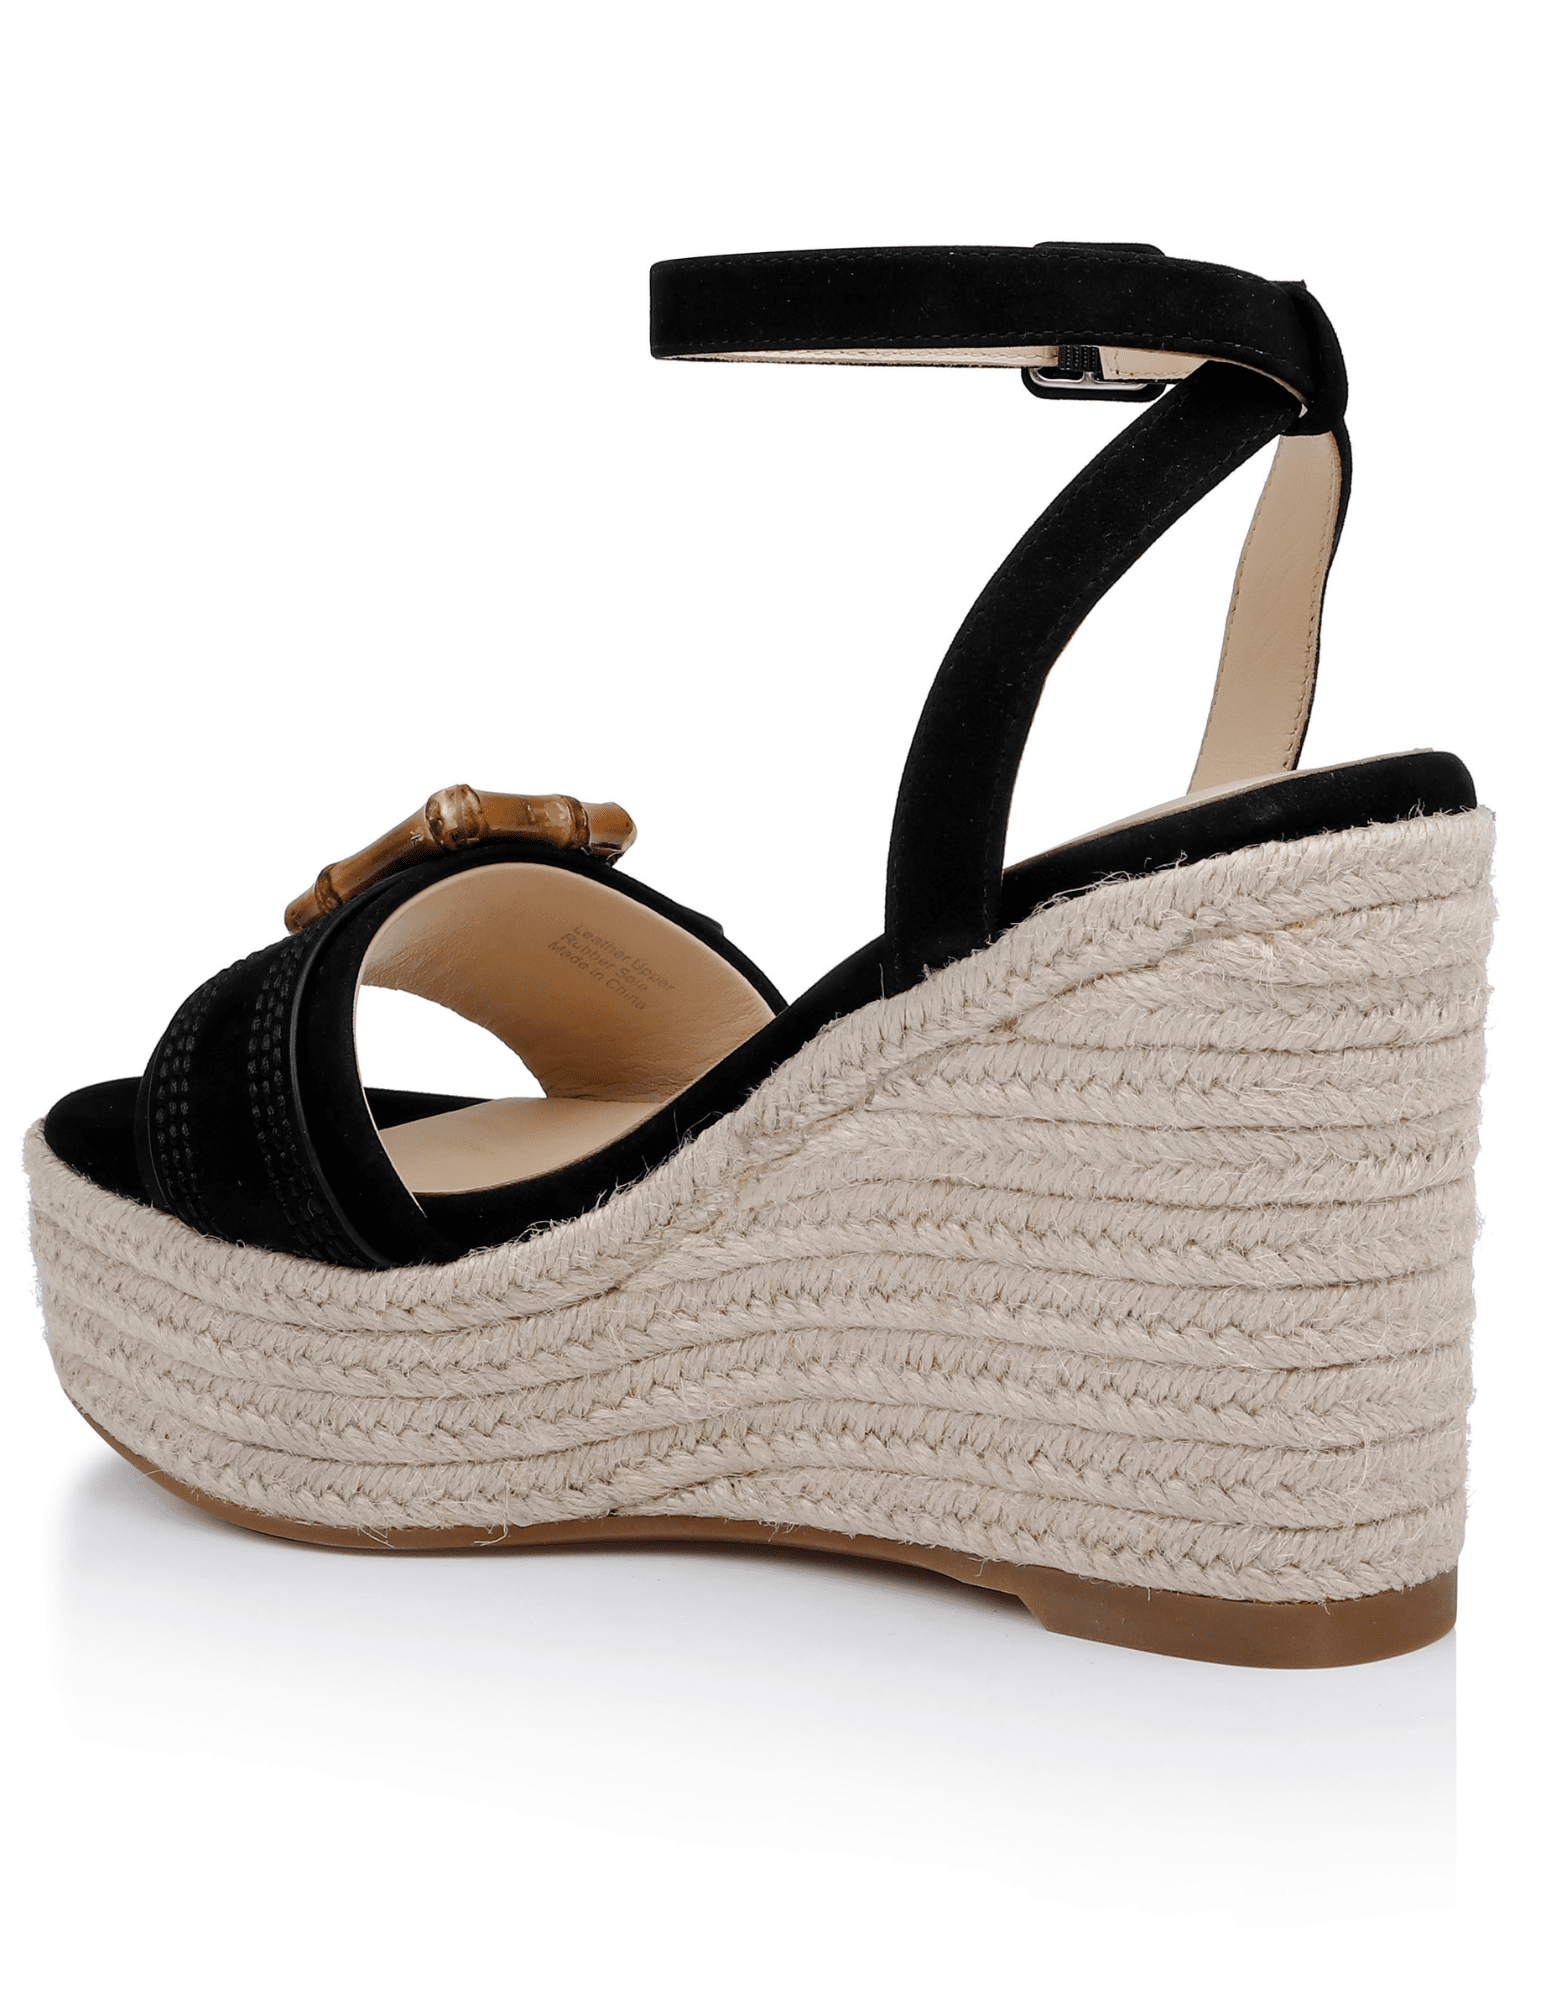 L'Agence Aurore Bamboo Buckle Espadrille Wedge Sandal